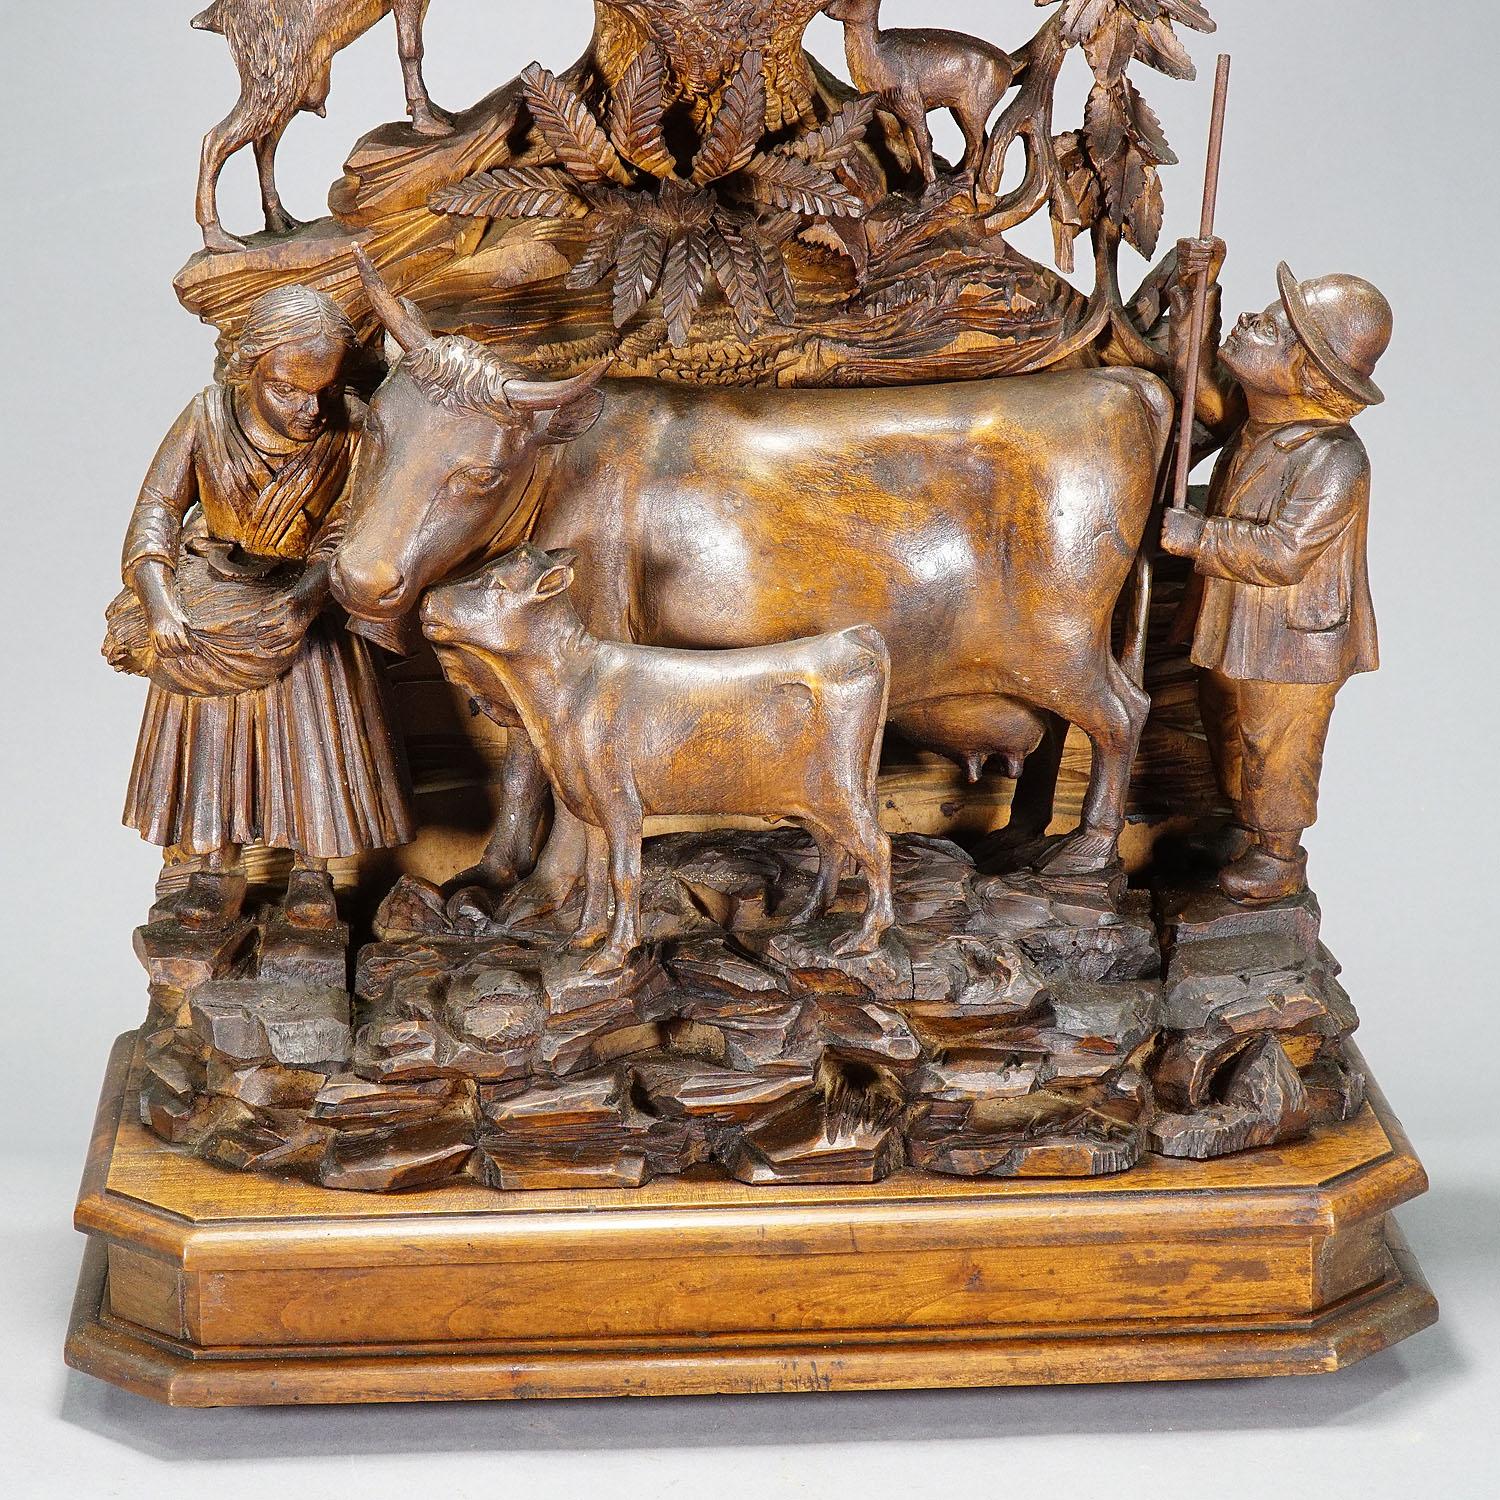 German Antique Mantel Clock with Herdsman Family, Goats and Cattle For Sale